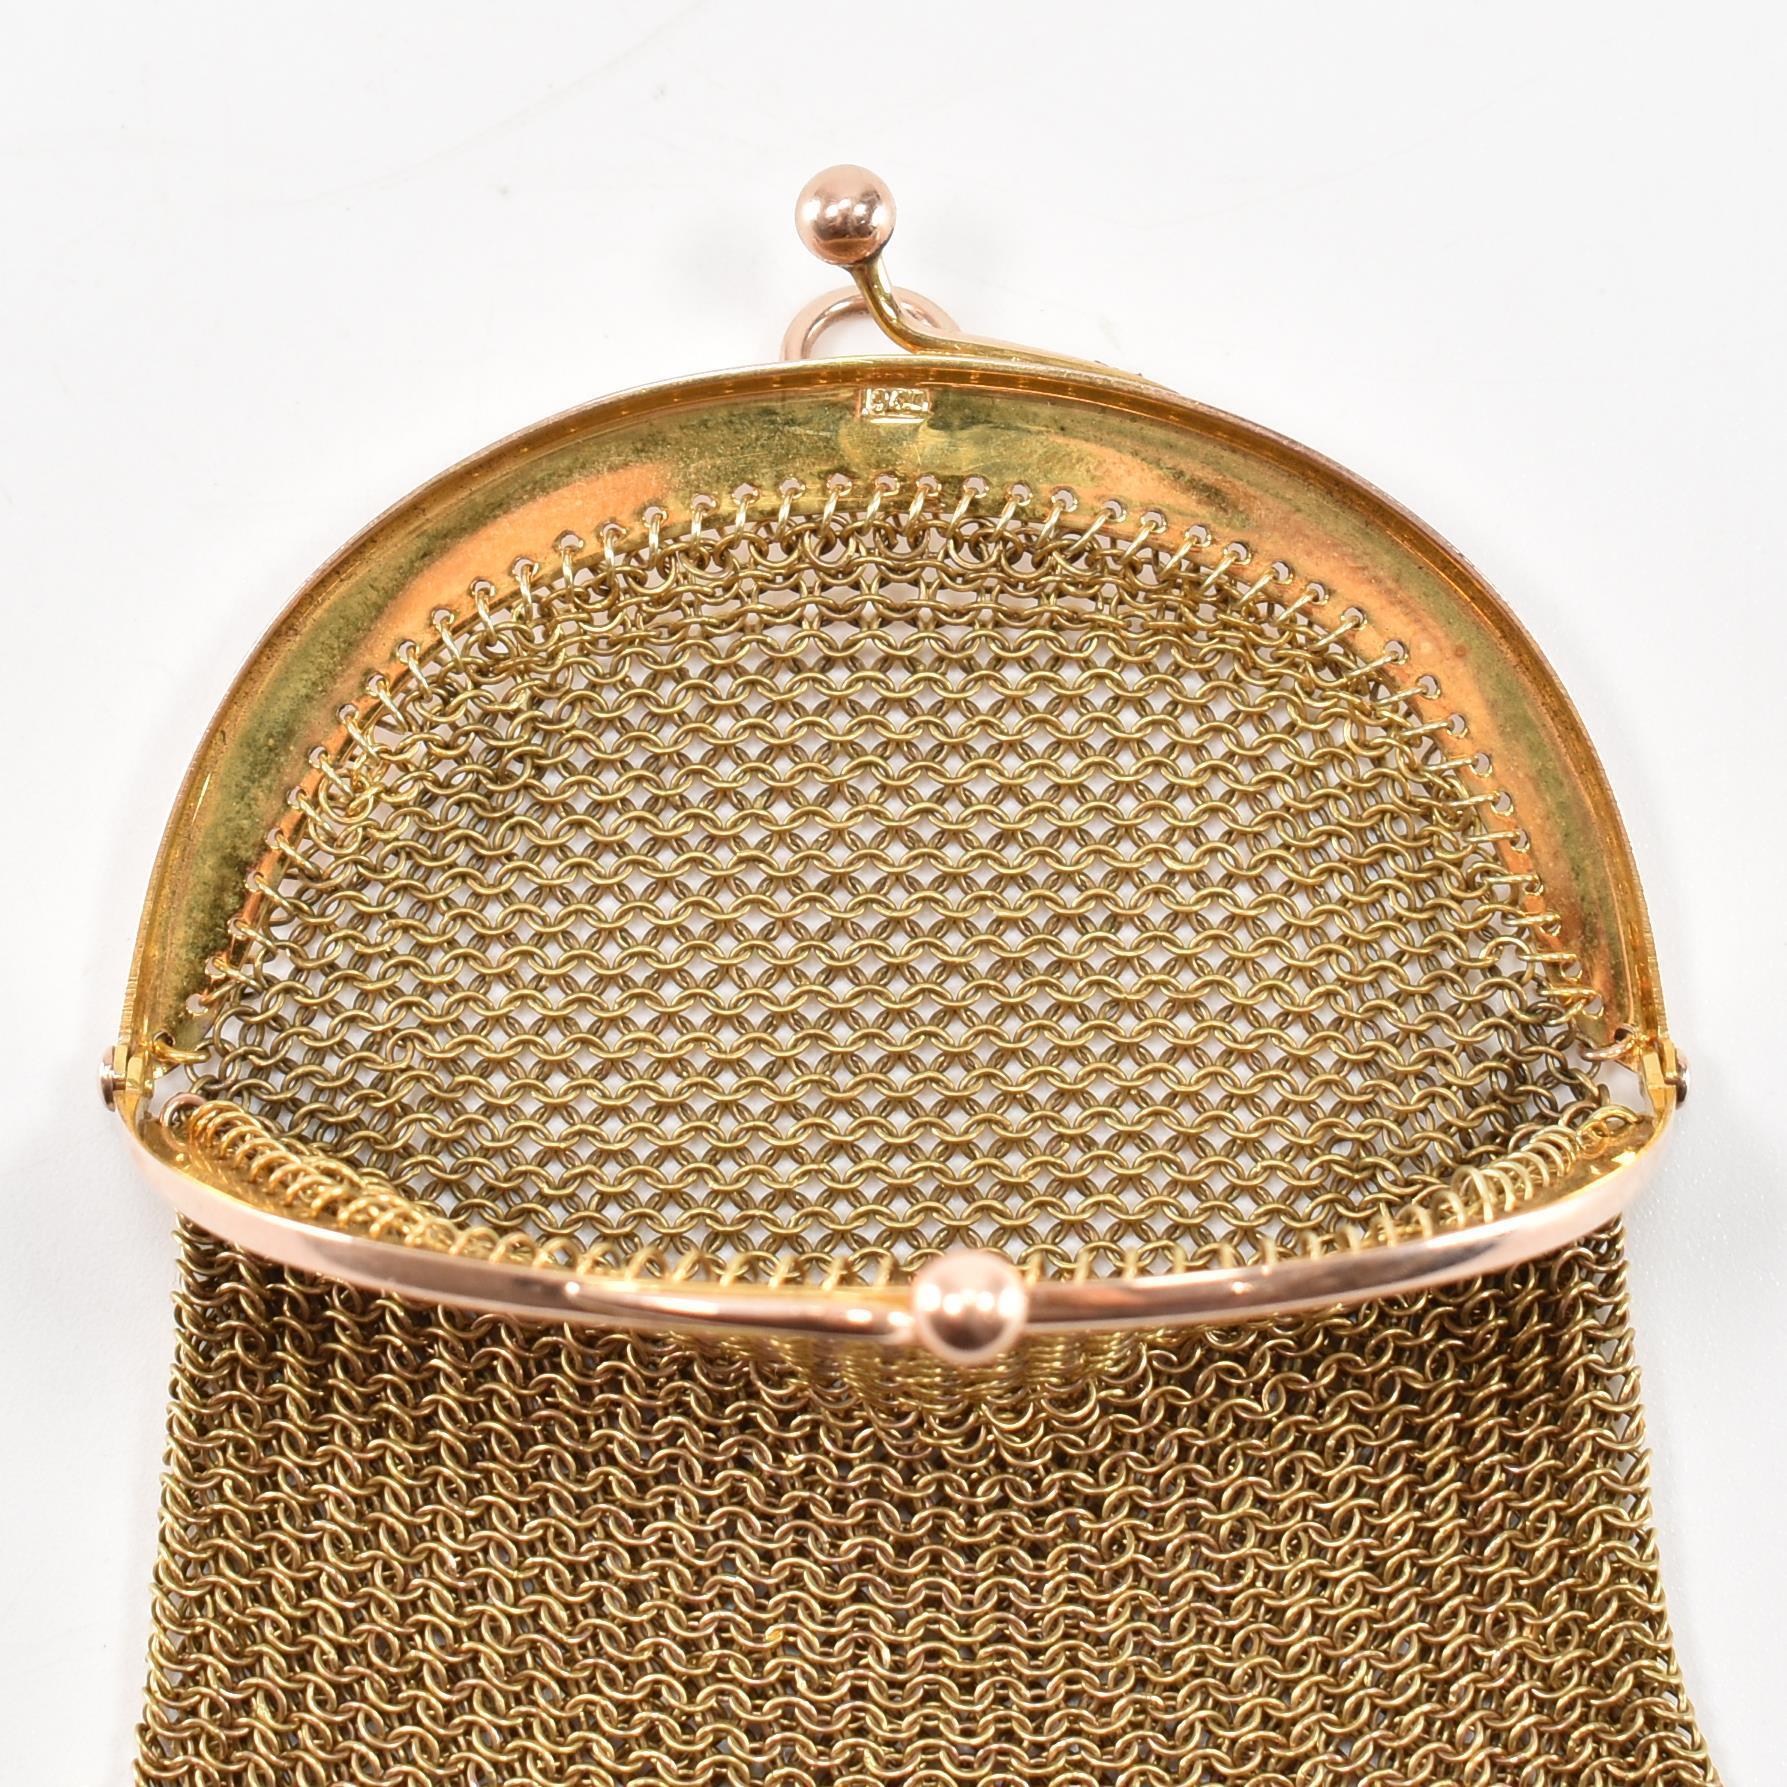 VINTAGE GOLD SOVEREIGN MESH PURSE - Image 5 of 6